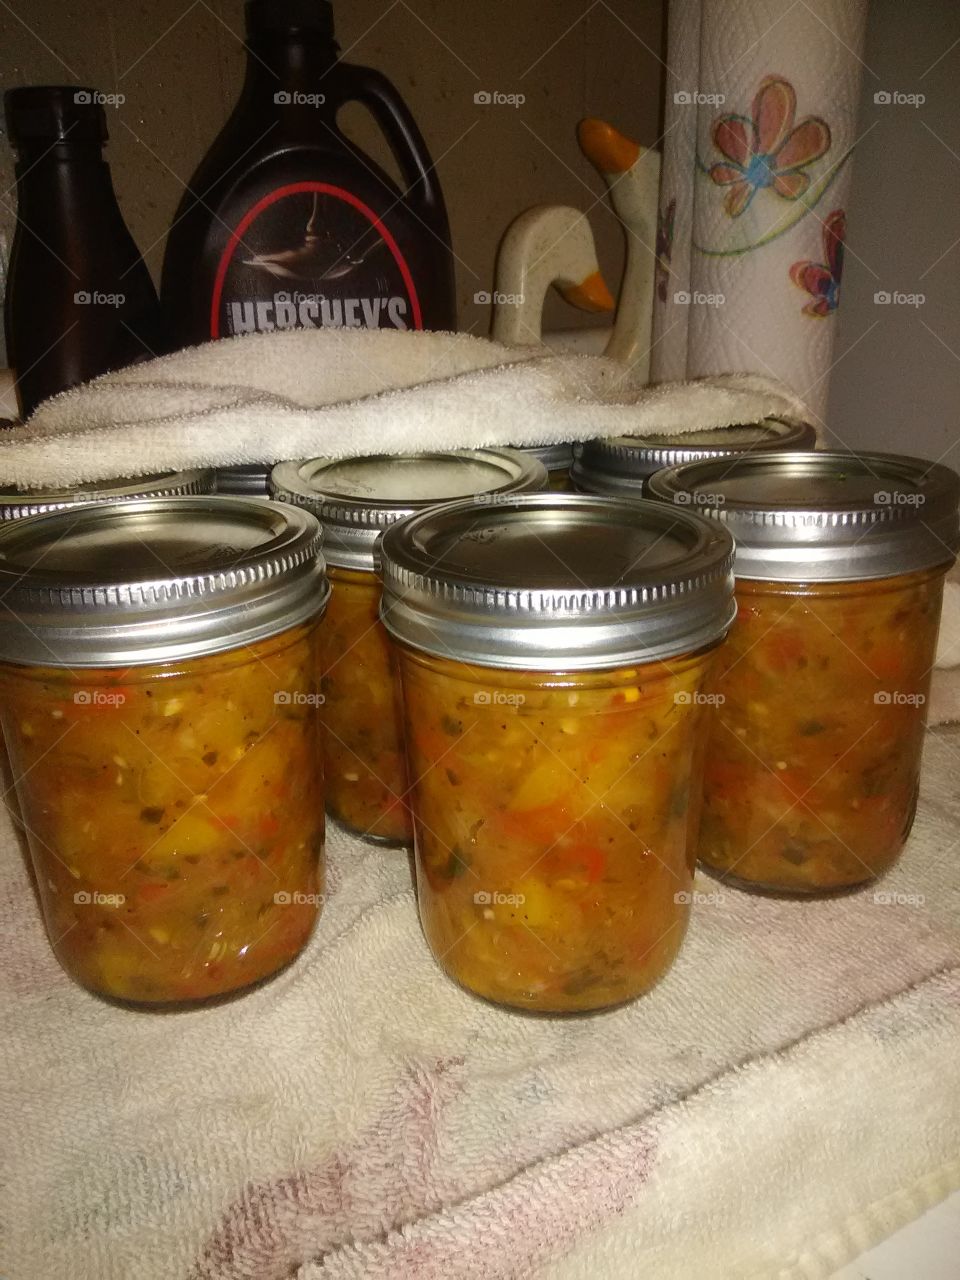 This is our first attempt ever at making fruit salsa.